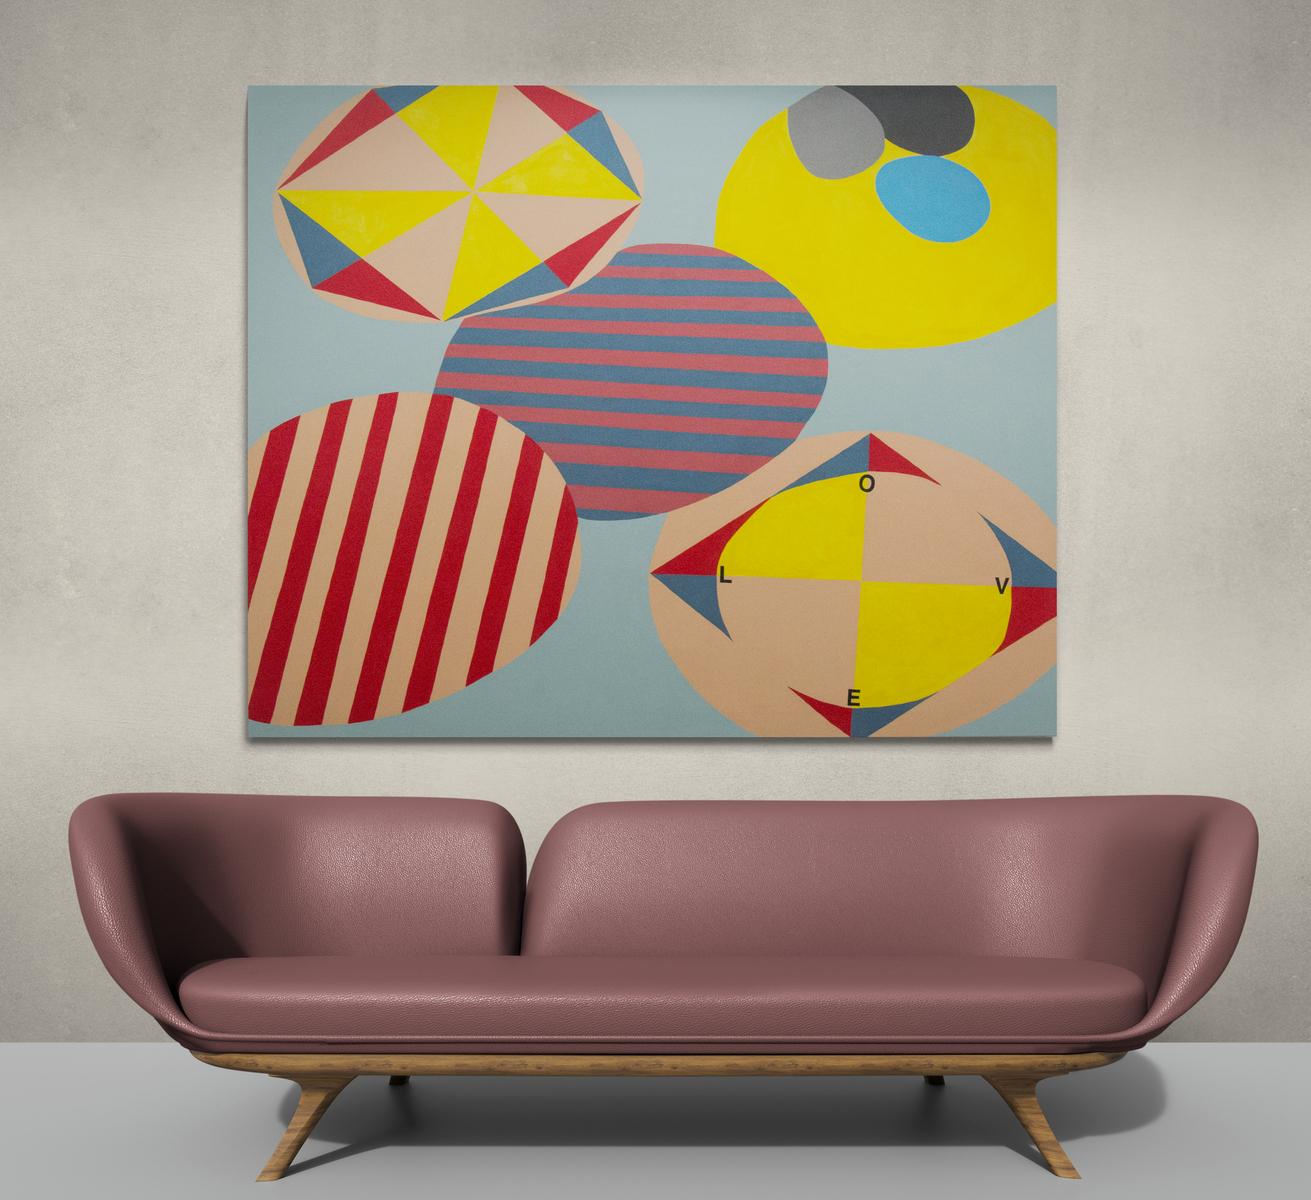 Room for Mystics 1 - Abstract oval shapes in peach, red, yellow and blue  - Brown Abstract Painting by Sandra Meigs